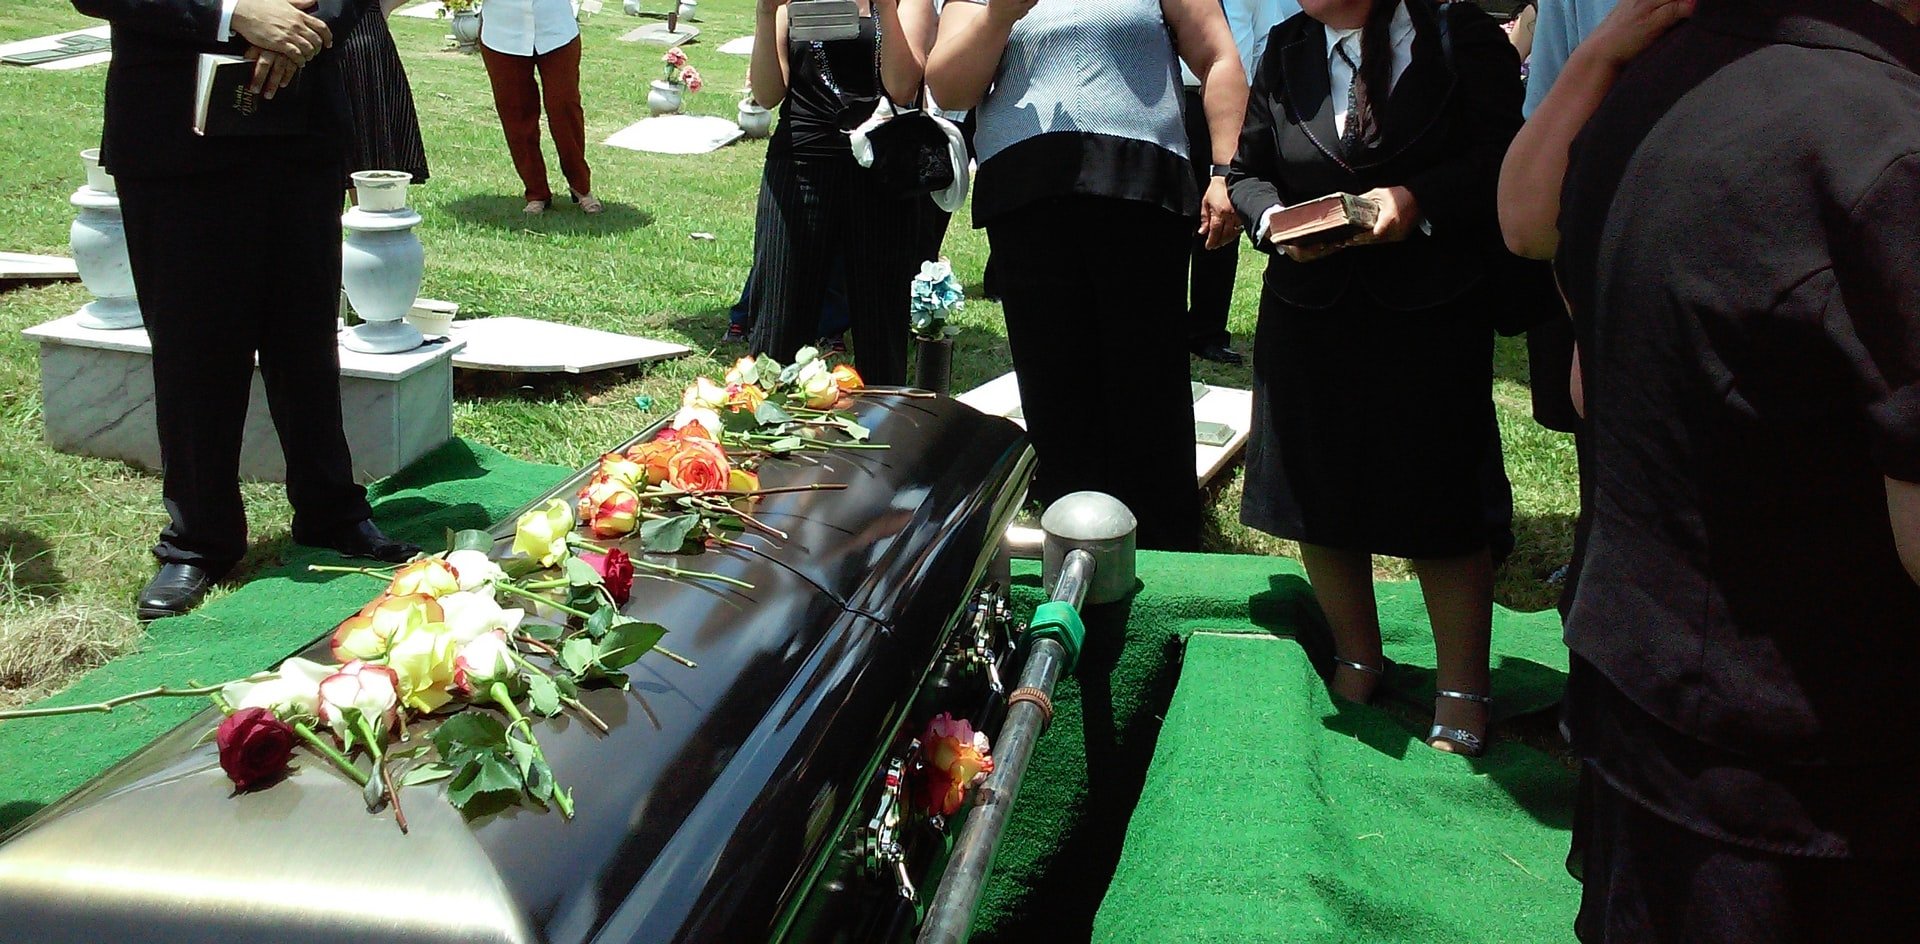 She revealed what happened at the funeral | Source: Unsplash